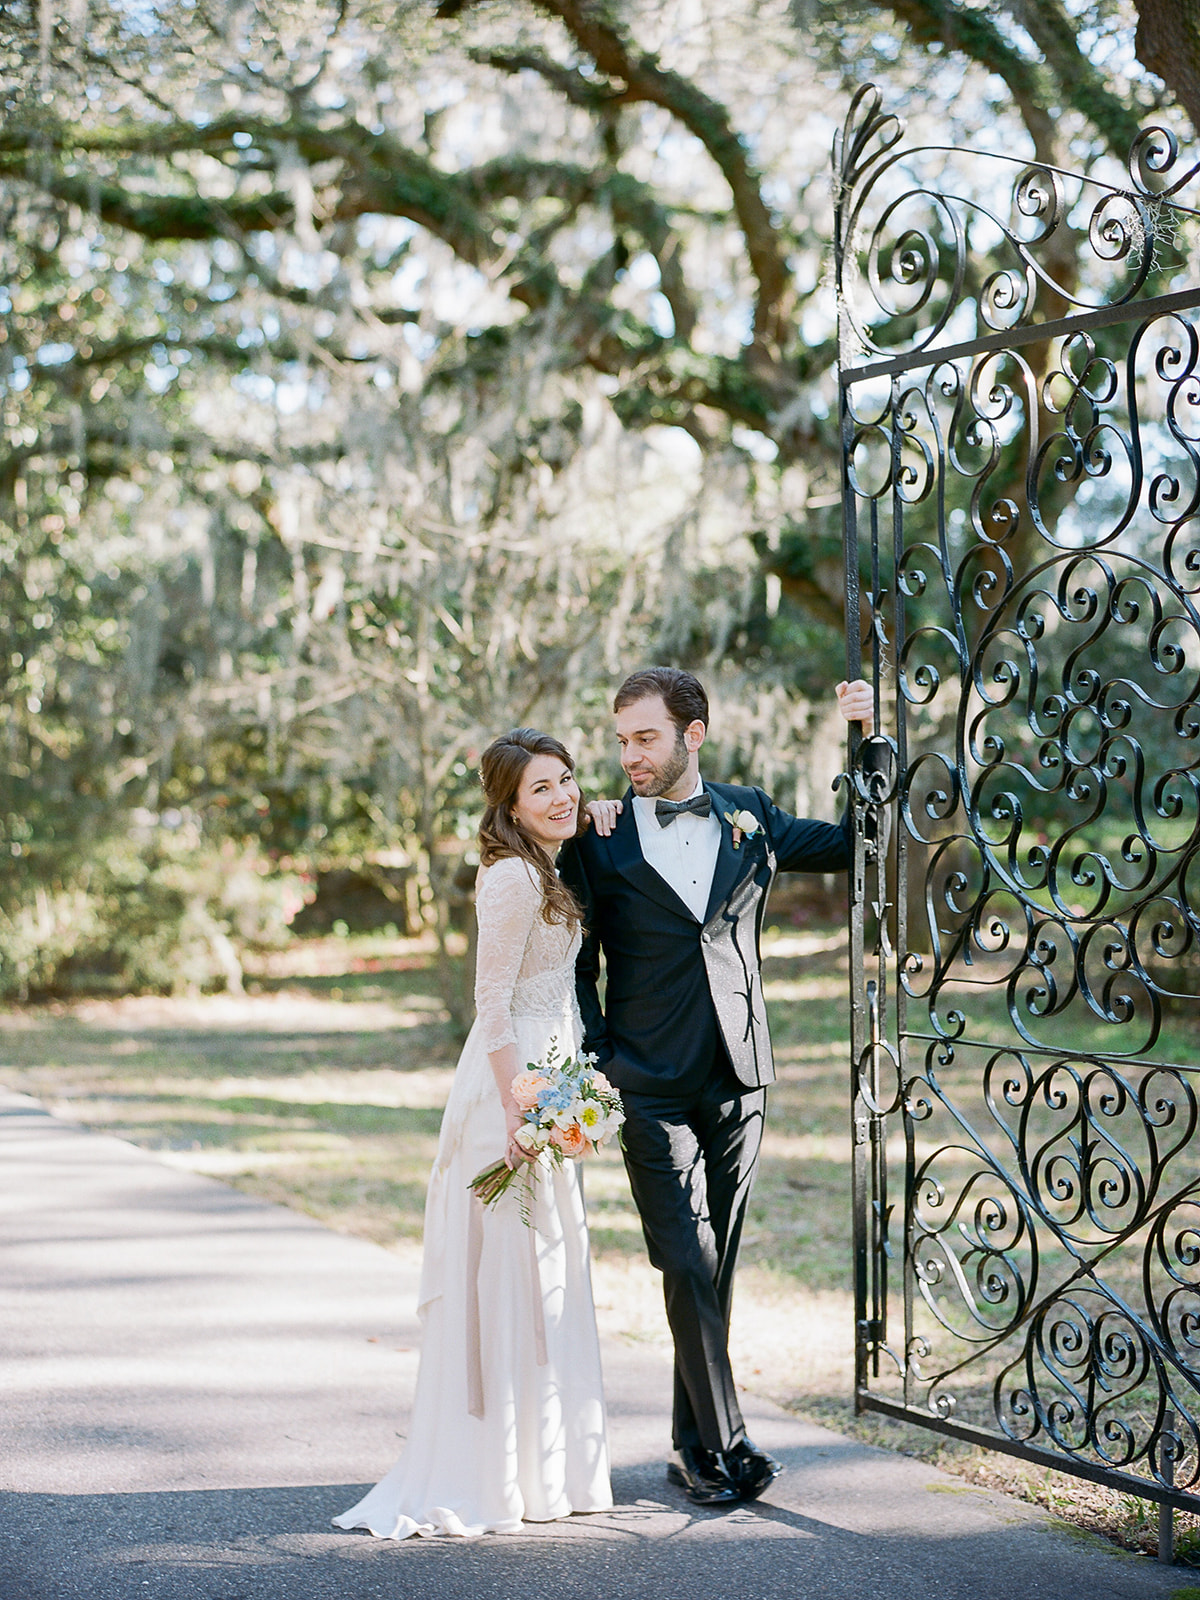 Winter wedding in Charleston with a vintage inspired wedding dress and black groom tux, designed by destination wedding planner Willow and Oak Events and captured by Kylee Yee Photography